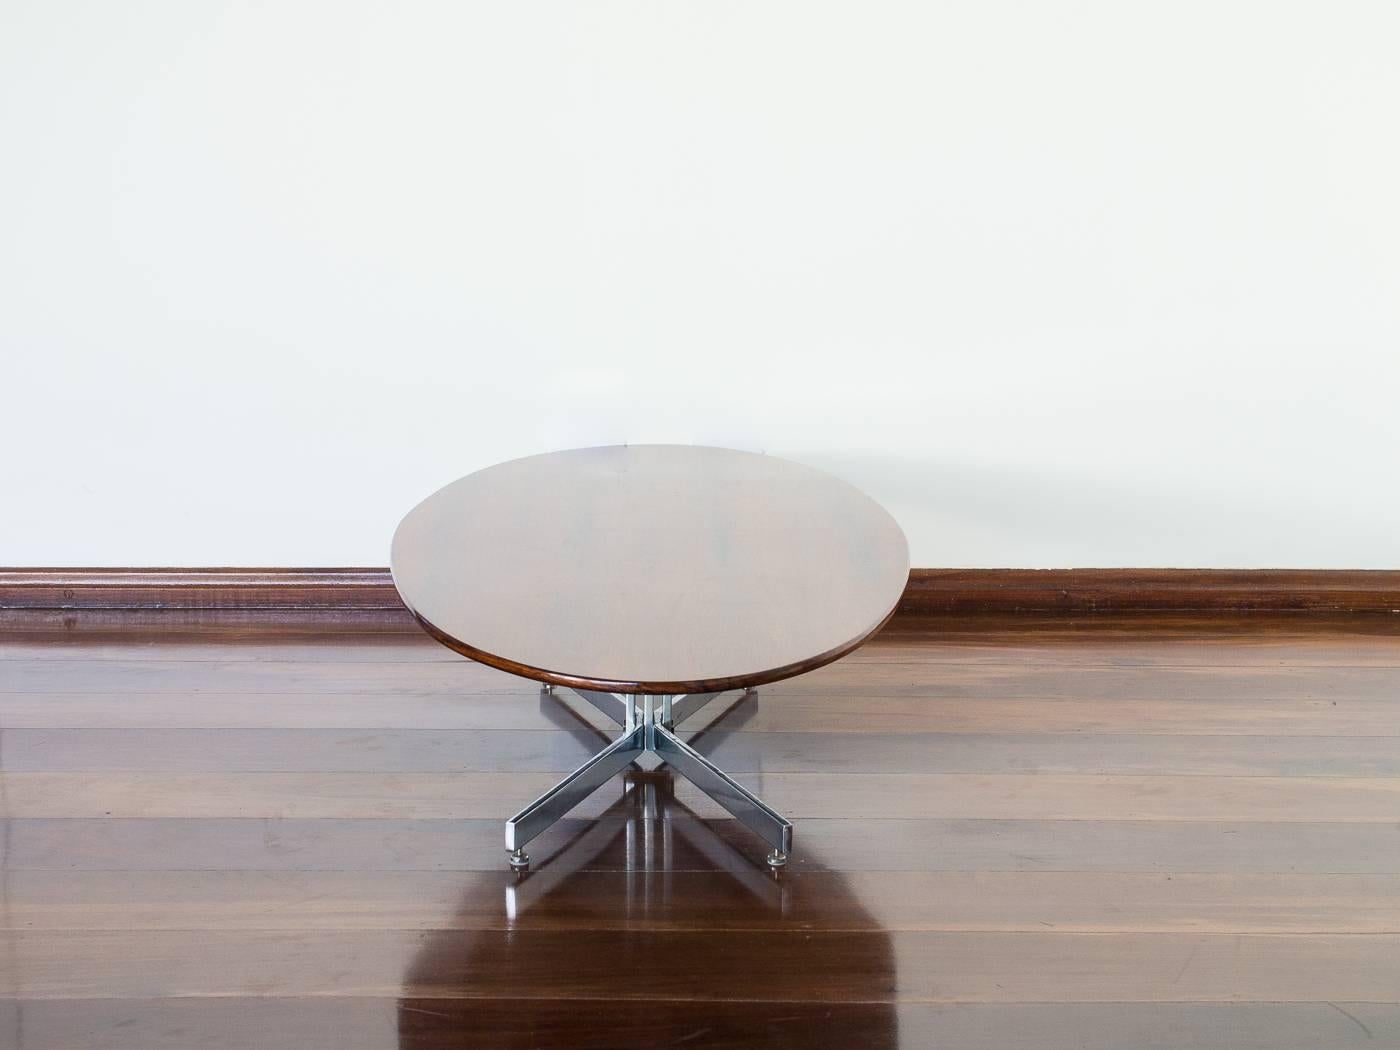 Mid-Century Modern  1960s Elliptical Coffee Table in Rosewood and Chrome by Jorge Zalszupin, Brazil